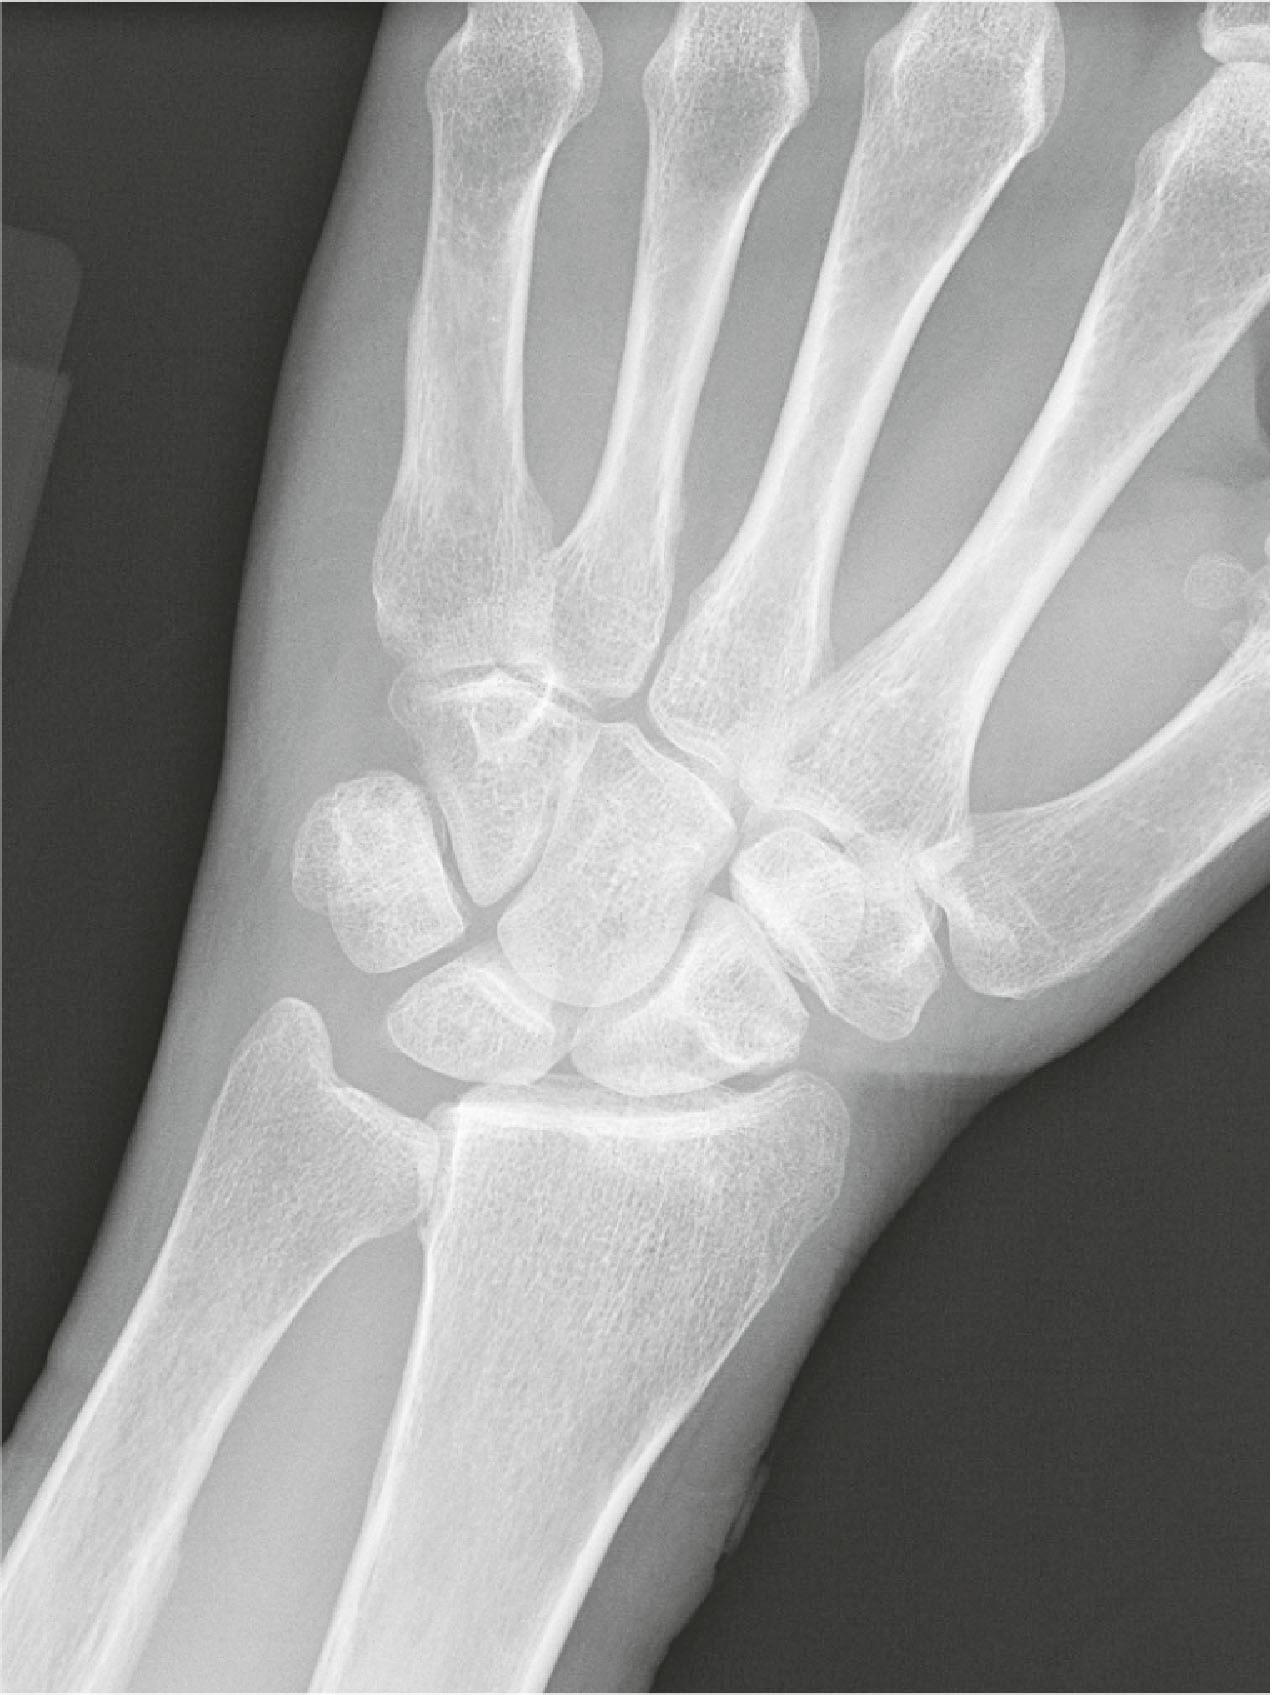 Figure 19.3, Posteroanterior (PA) radiograph of the left wrist, demonstrating early involvement of the DRUJ, as well as scattered carpal erosions from invasive synovitis.